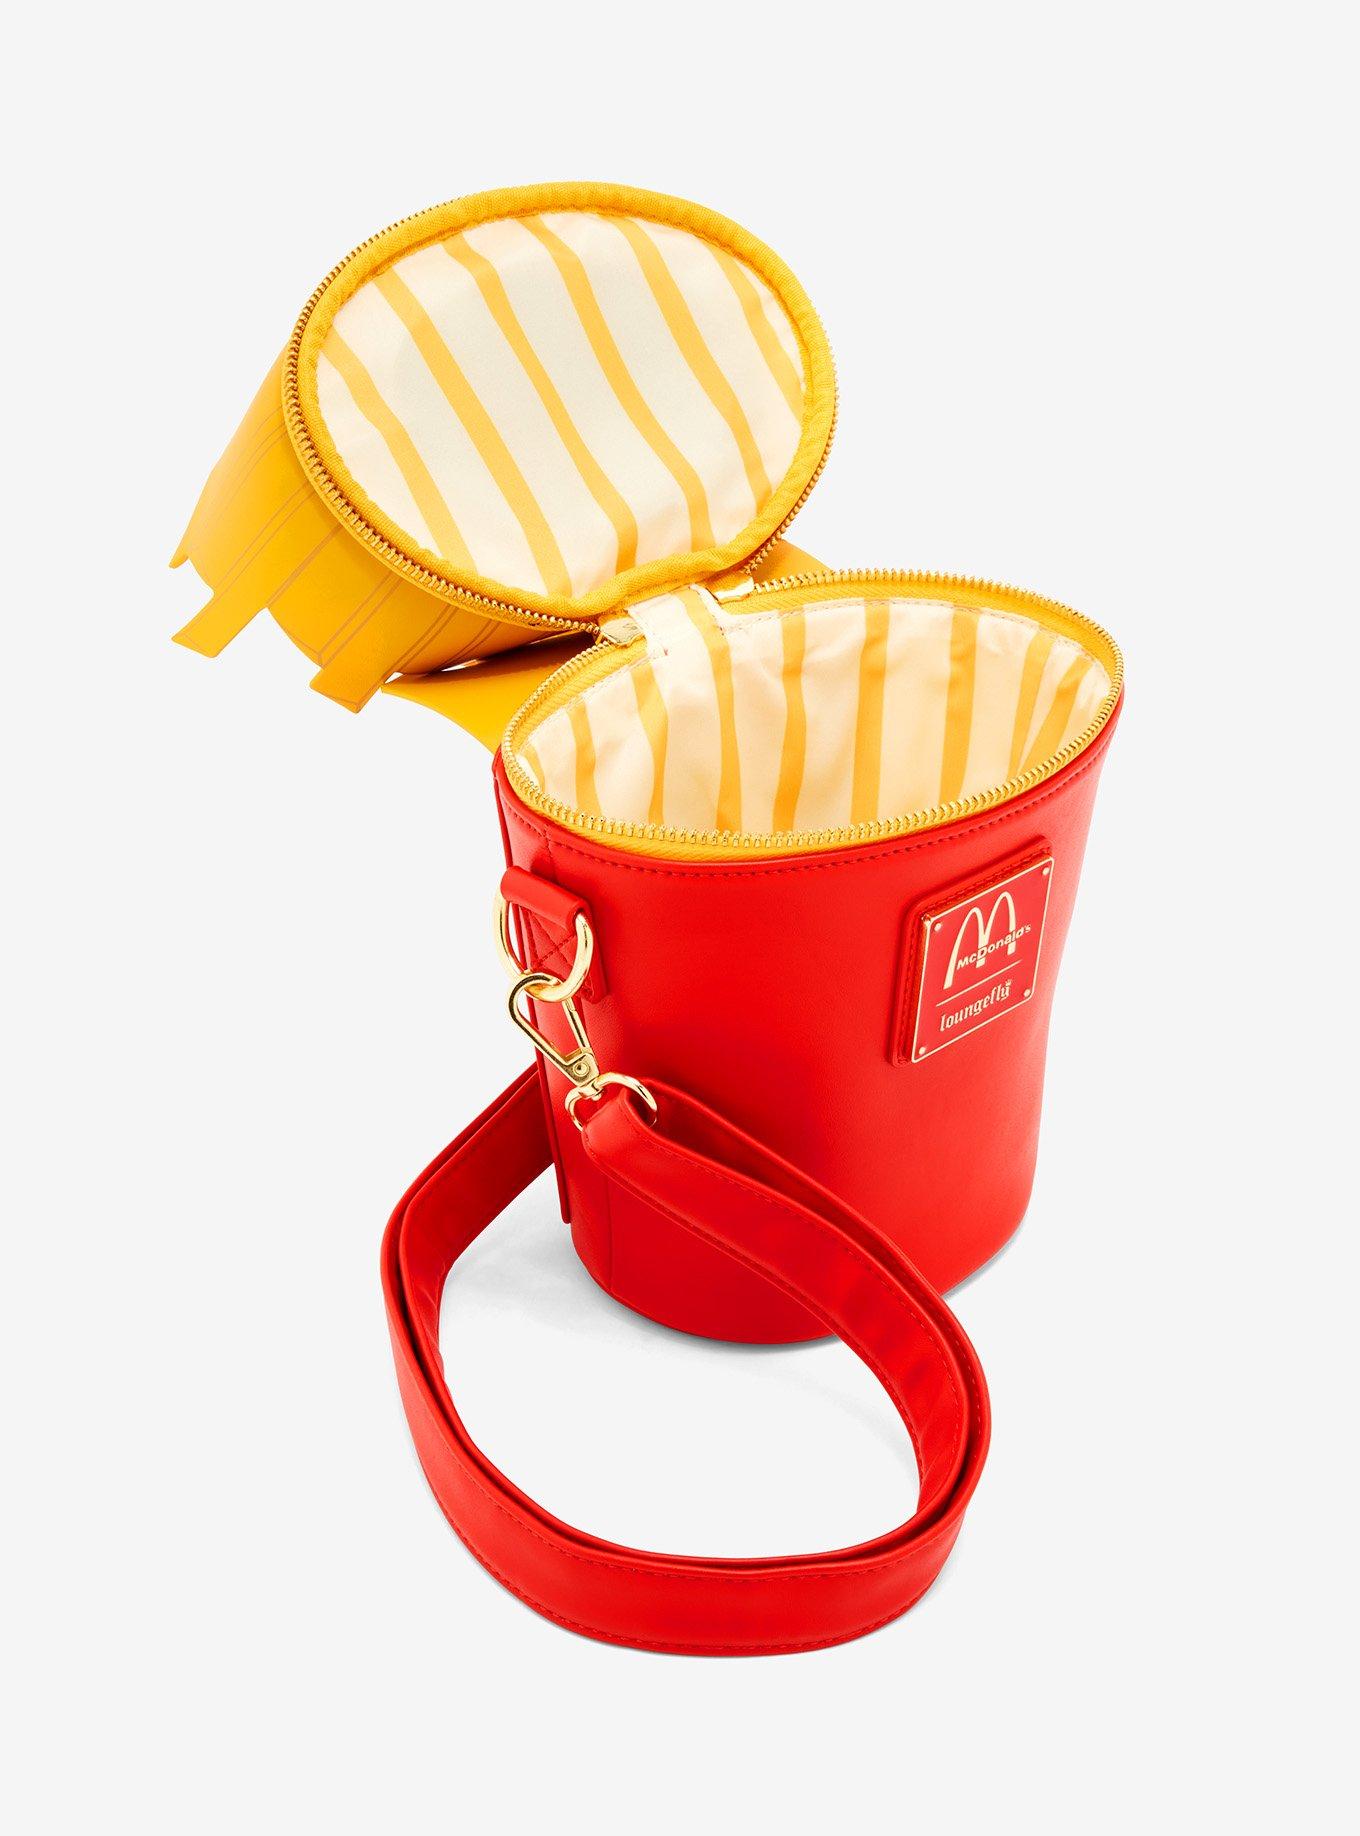 Loungefly McDonald's French Fry Crossbody Bag & Card Holder #loungefly